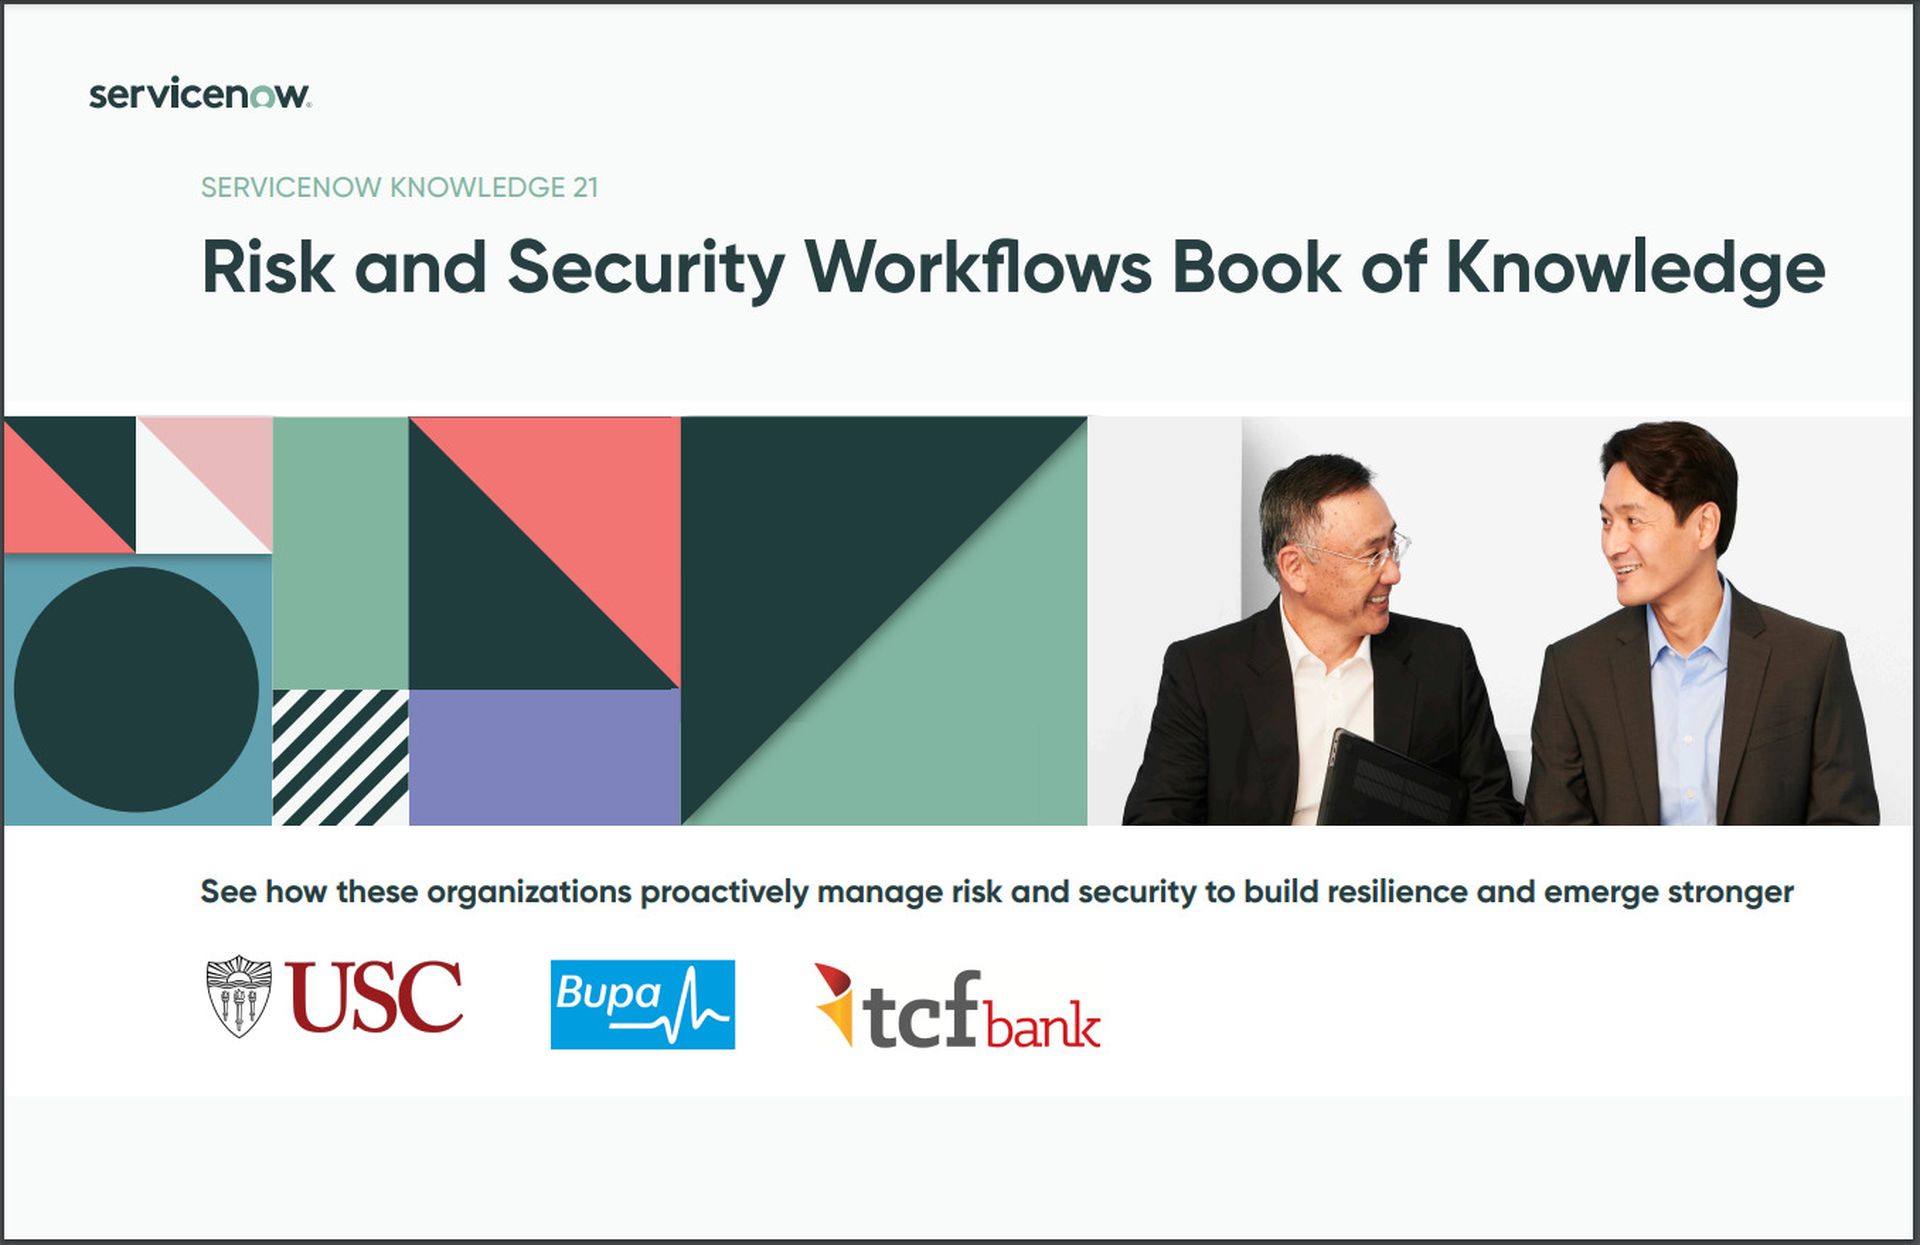 Risk and Security Workflows Book of Knowledge